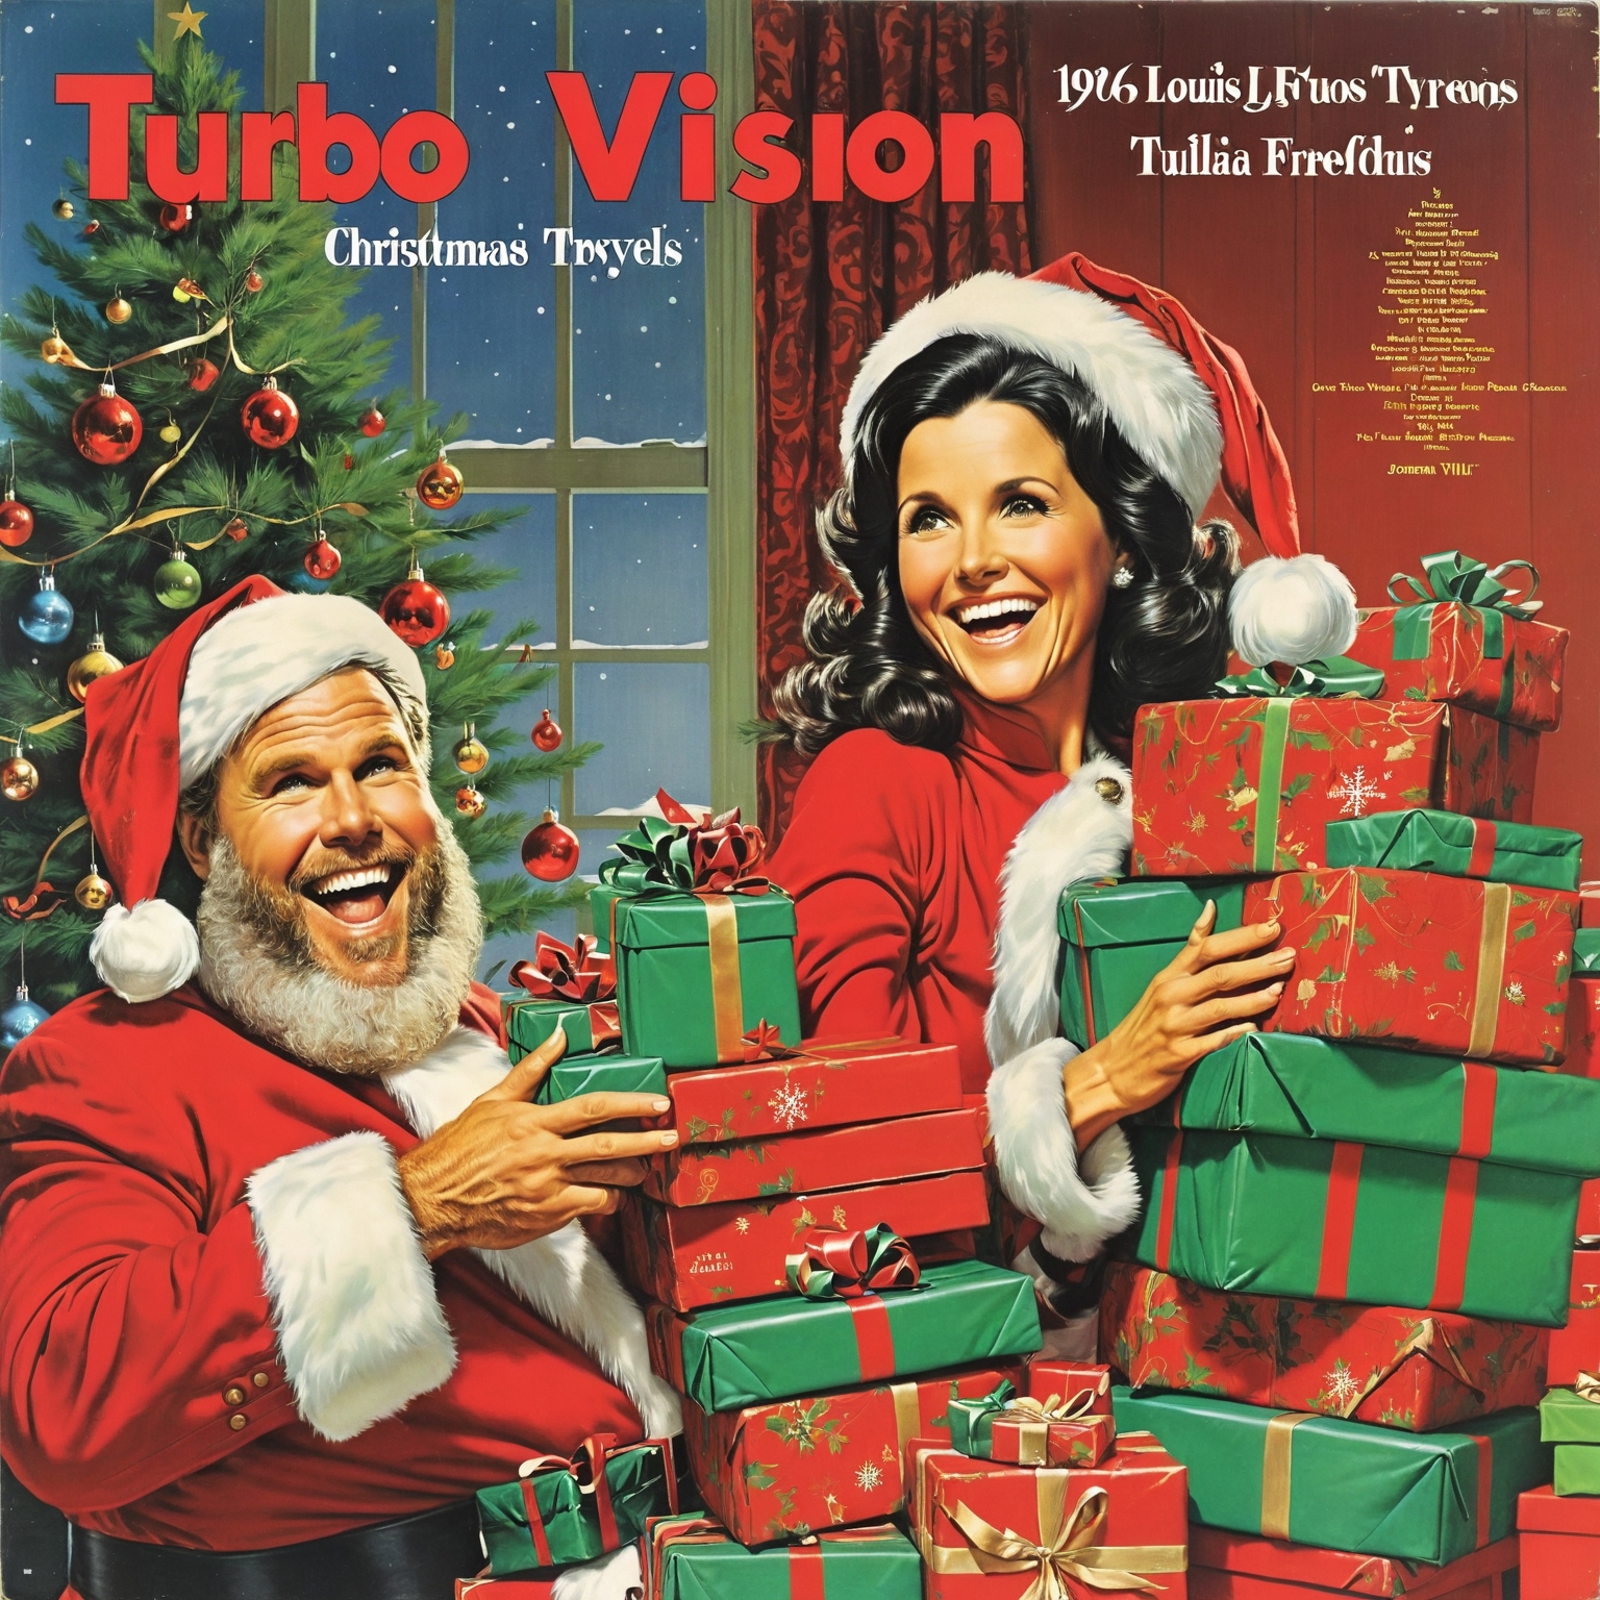 A cover of a Christmas album by Louis Troy and Tullia Freedman, featuring Santa and Santa's helper.